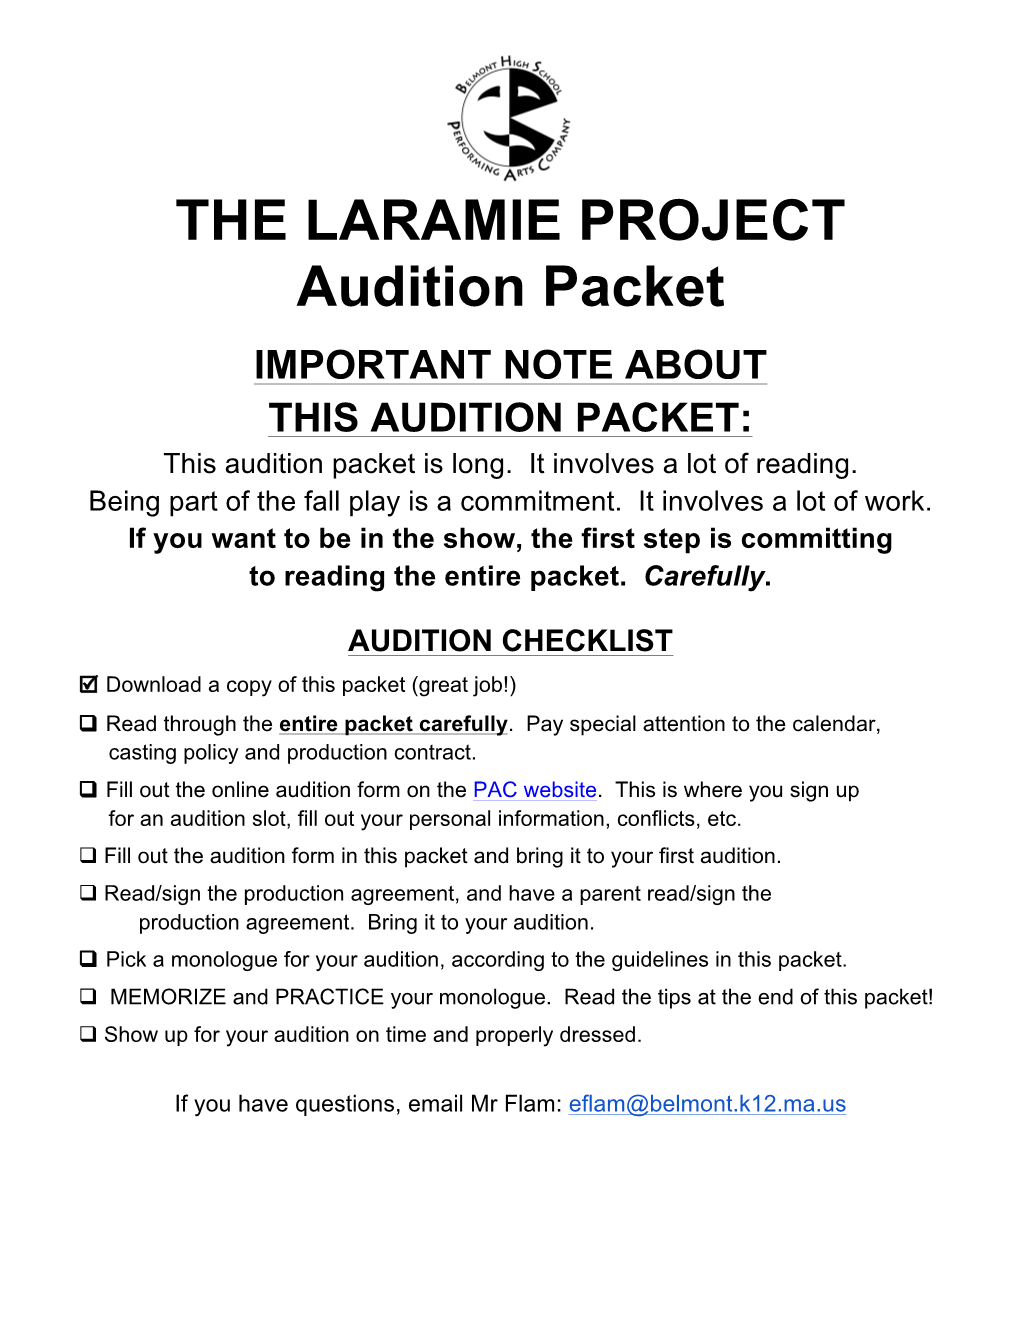 THE LARAMIE PROJECT Audition Packet